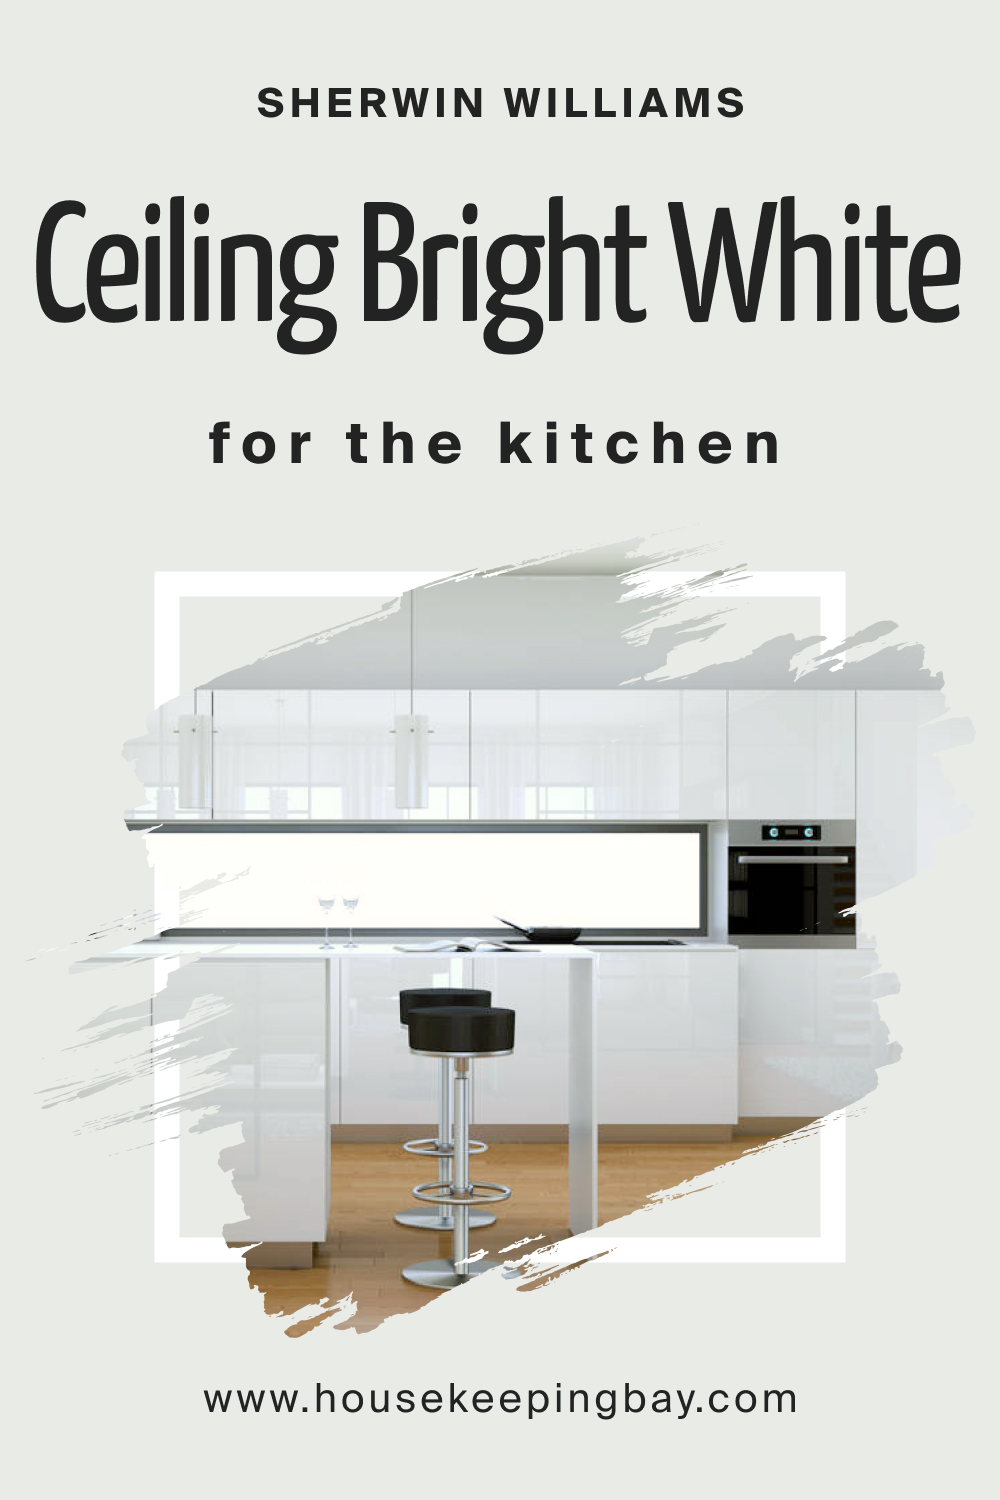 Sherwin Williams. SW Ceiling Bright White For the Kitchen